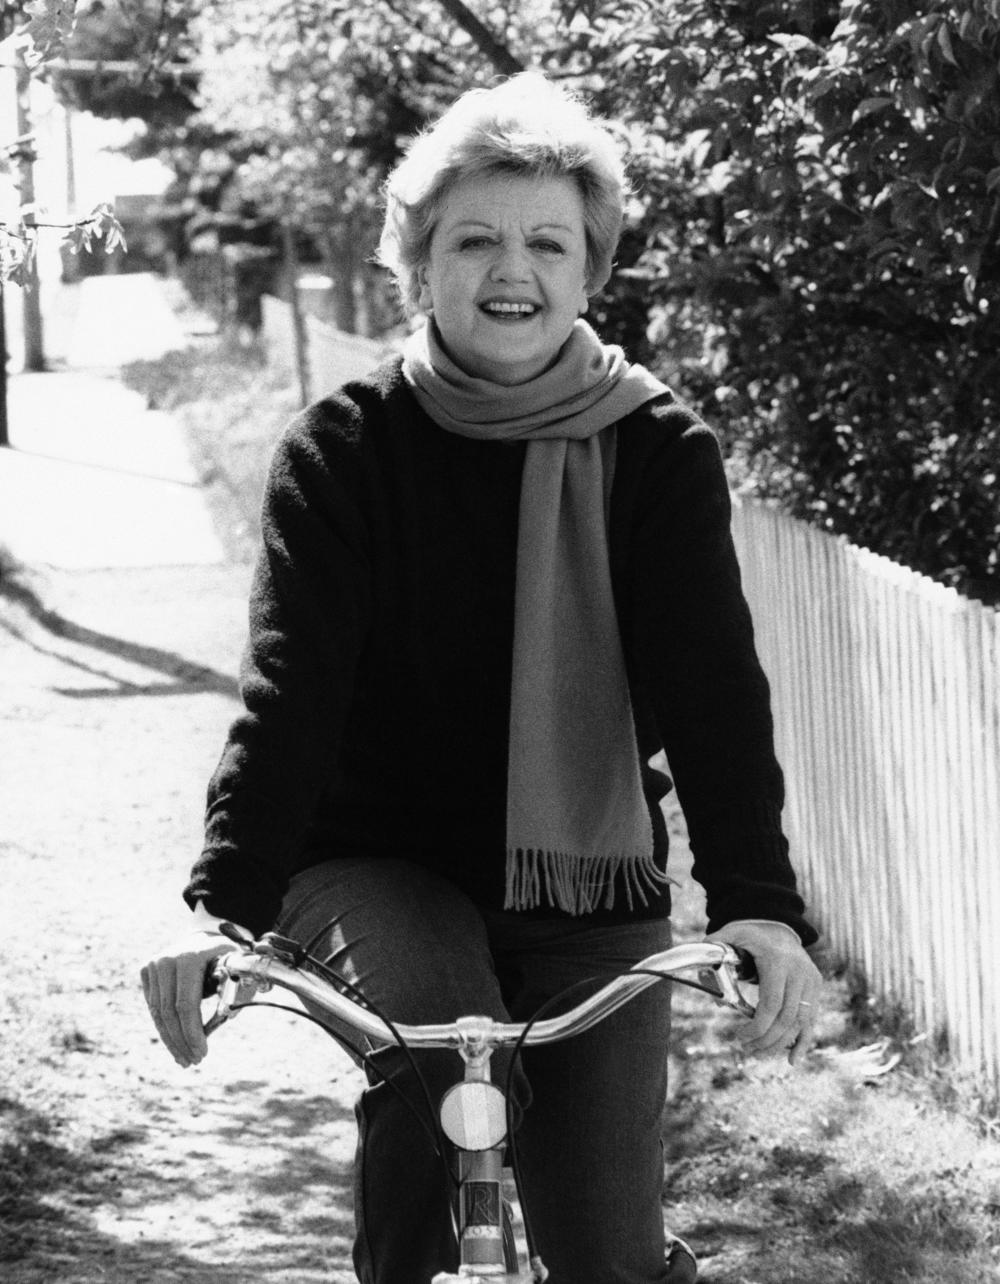 On the CBS series <em>Murder, She Wrote,</em> Lansbury played Jessica Fletcher, a widowed teacher from a small Maine coastal town who writes a best-seller which leads her into the business of sleuthing.